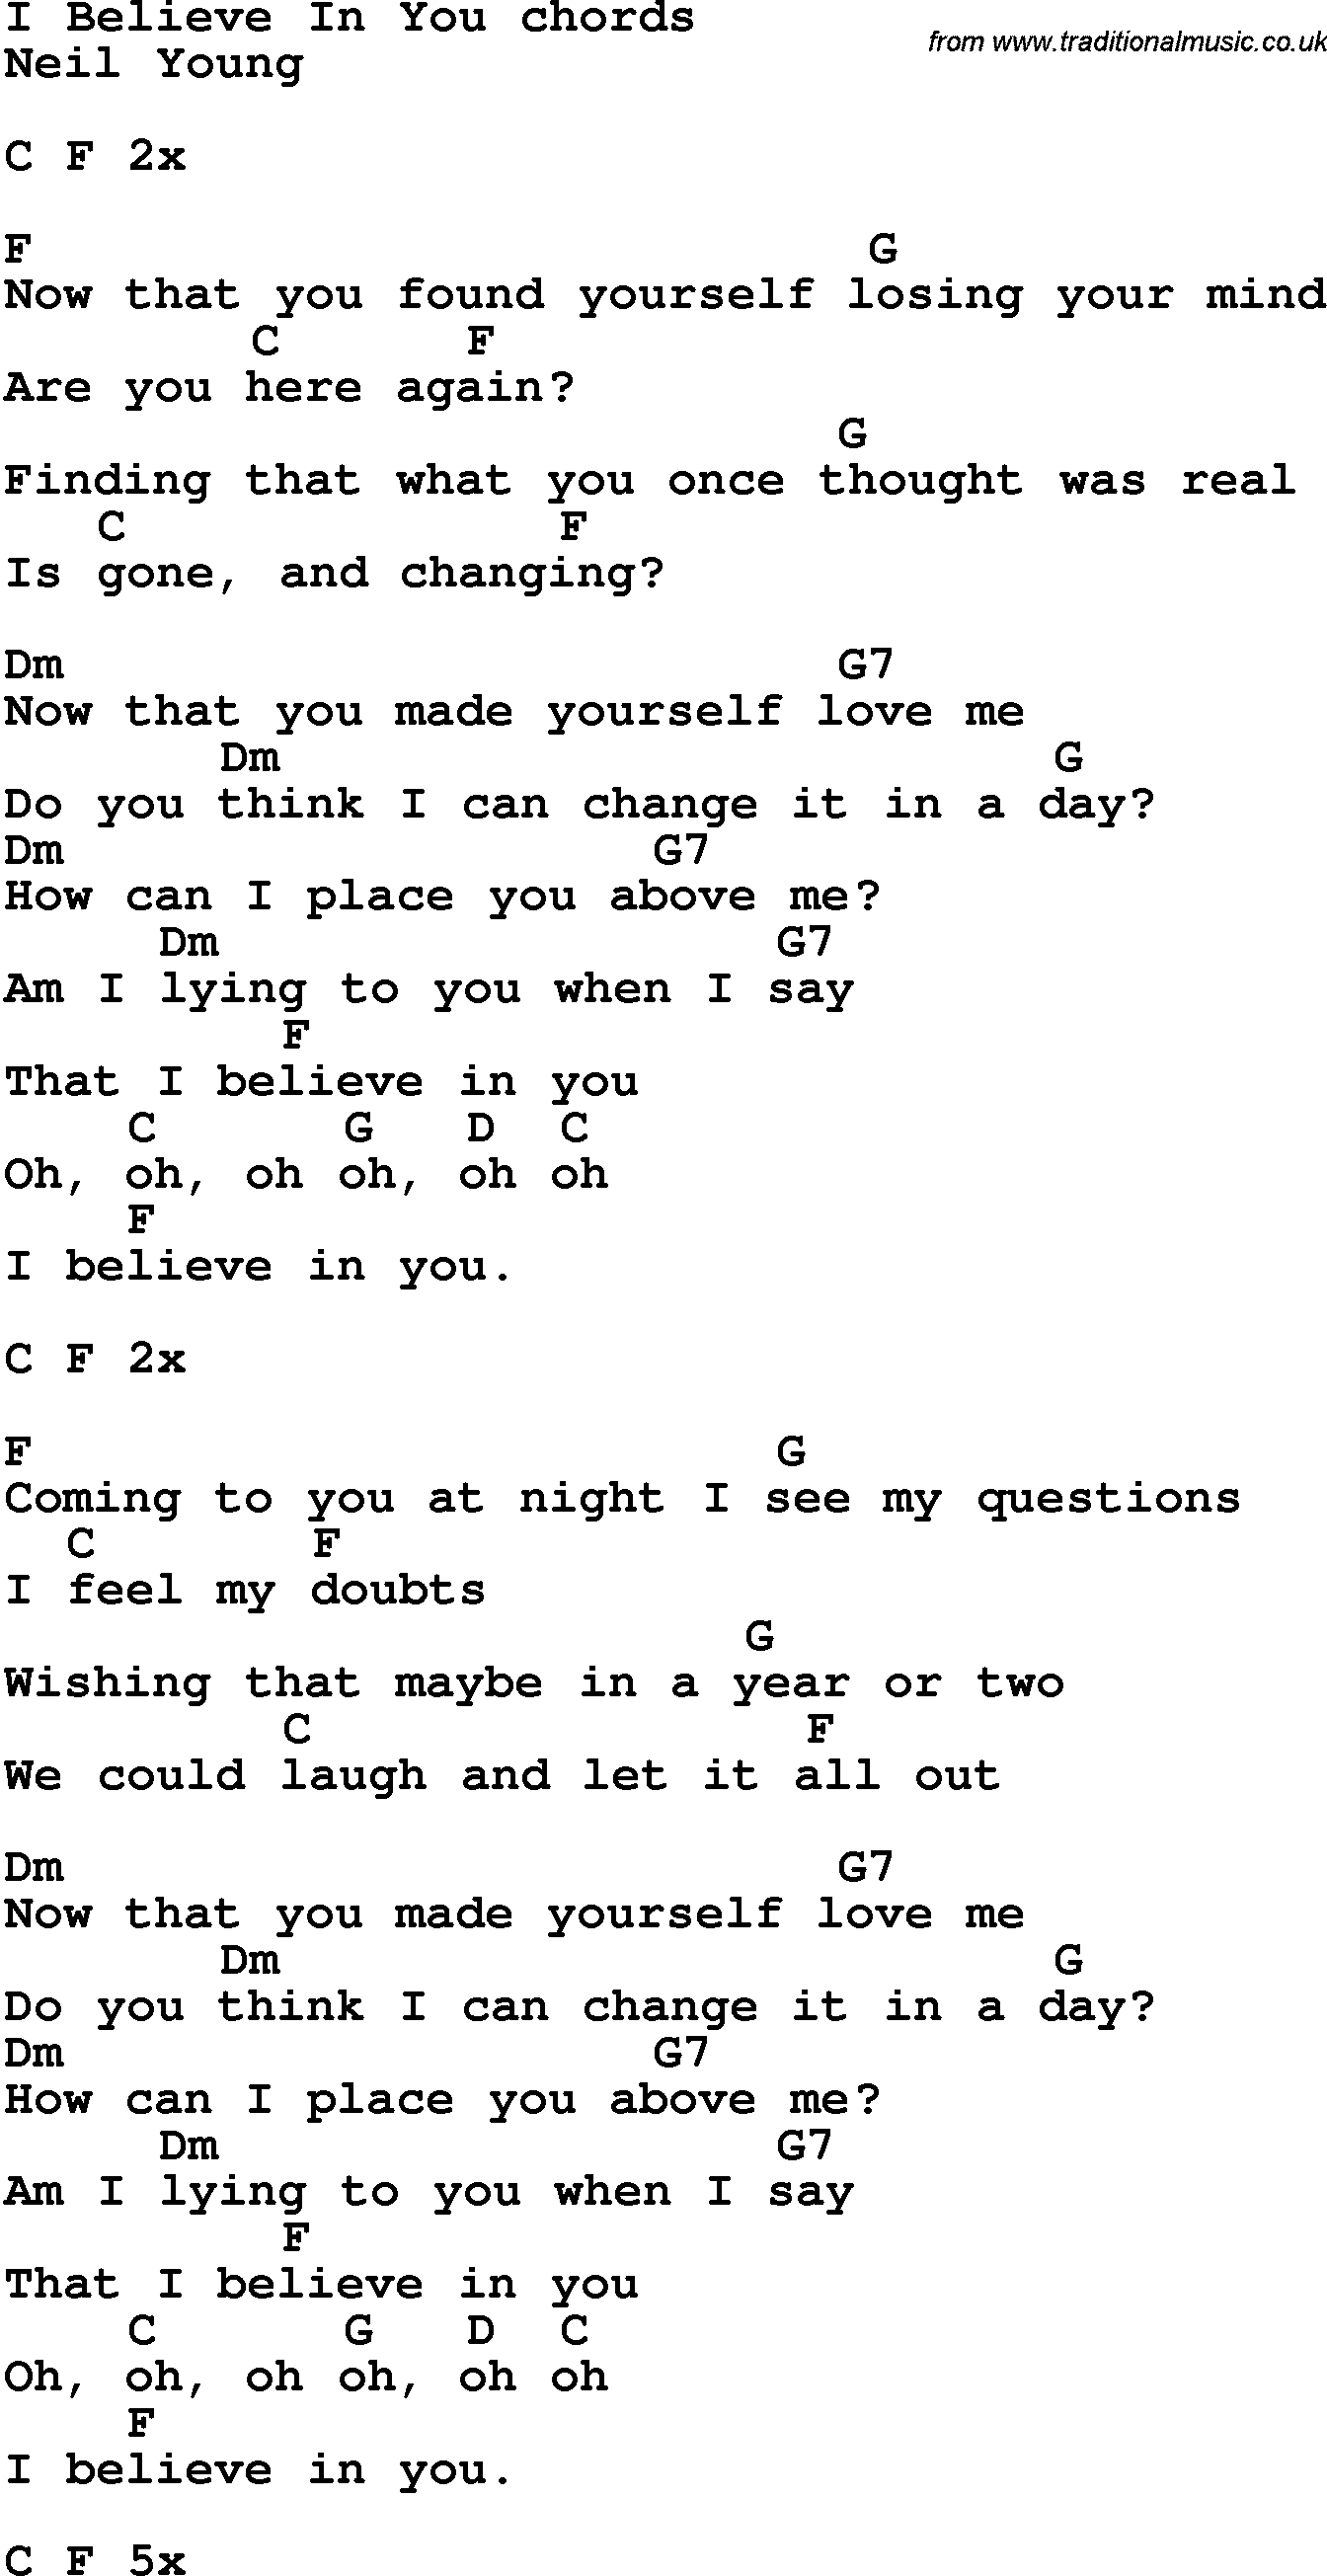 tell me why neil young lyrics chords